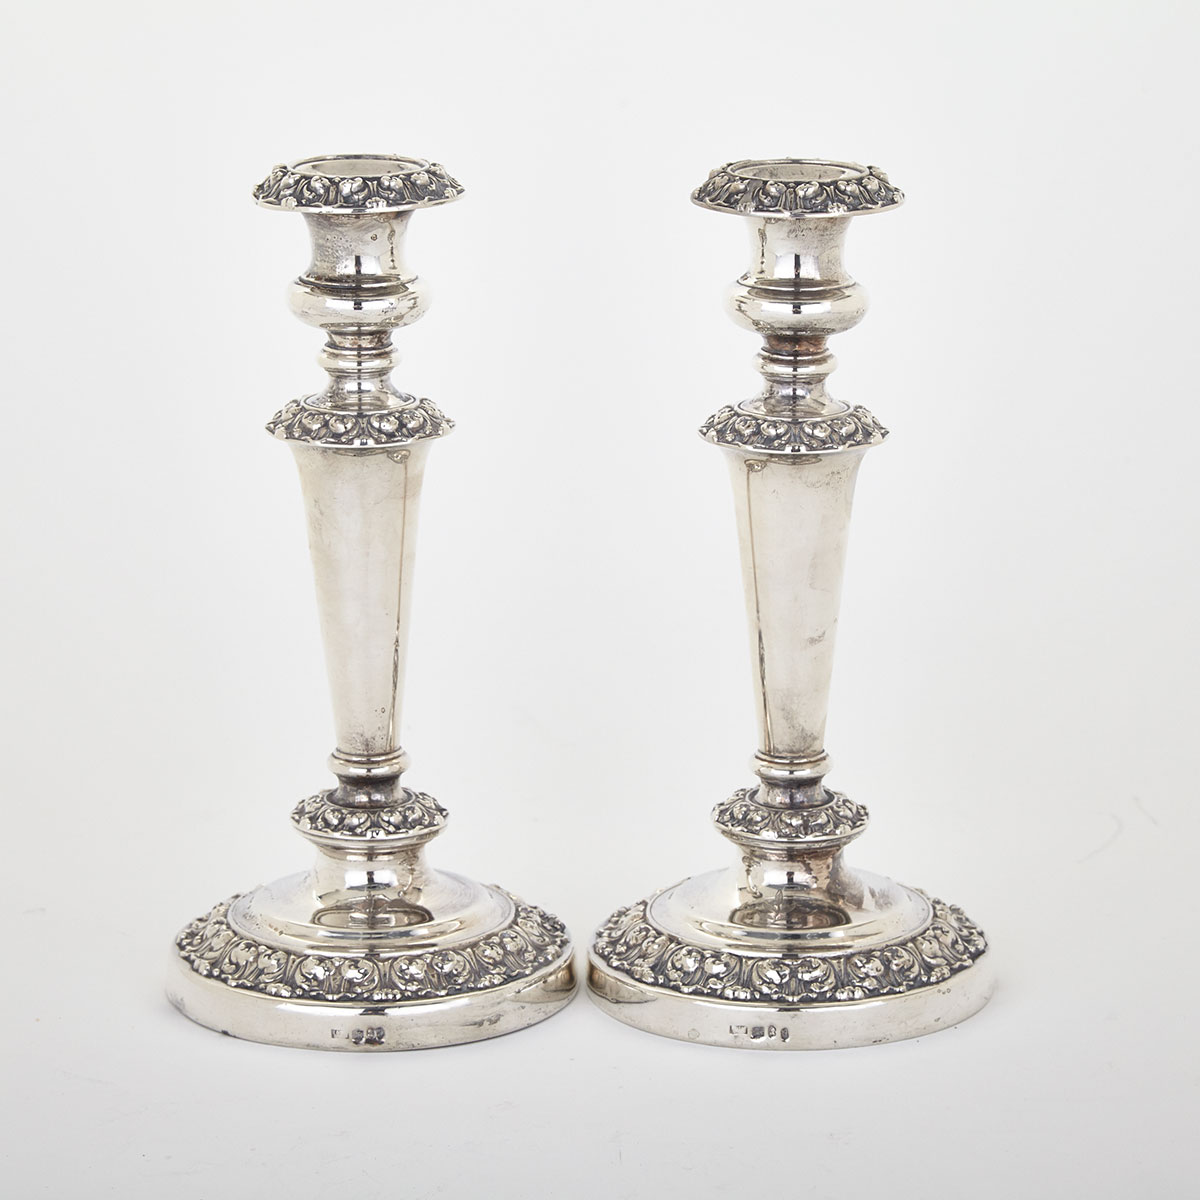 Pair of George IV Silver Table Candlesticks, Waterhouse, Hodson & Co., Sheffield, 1823